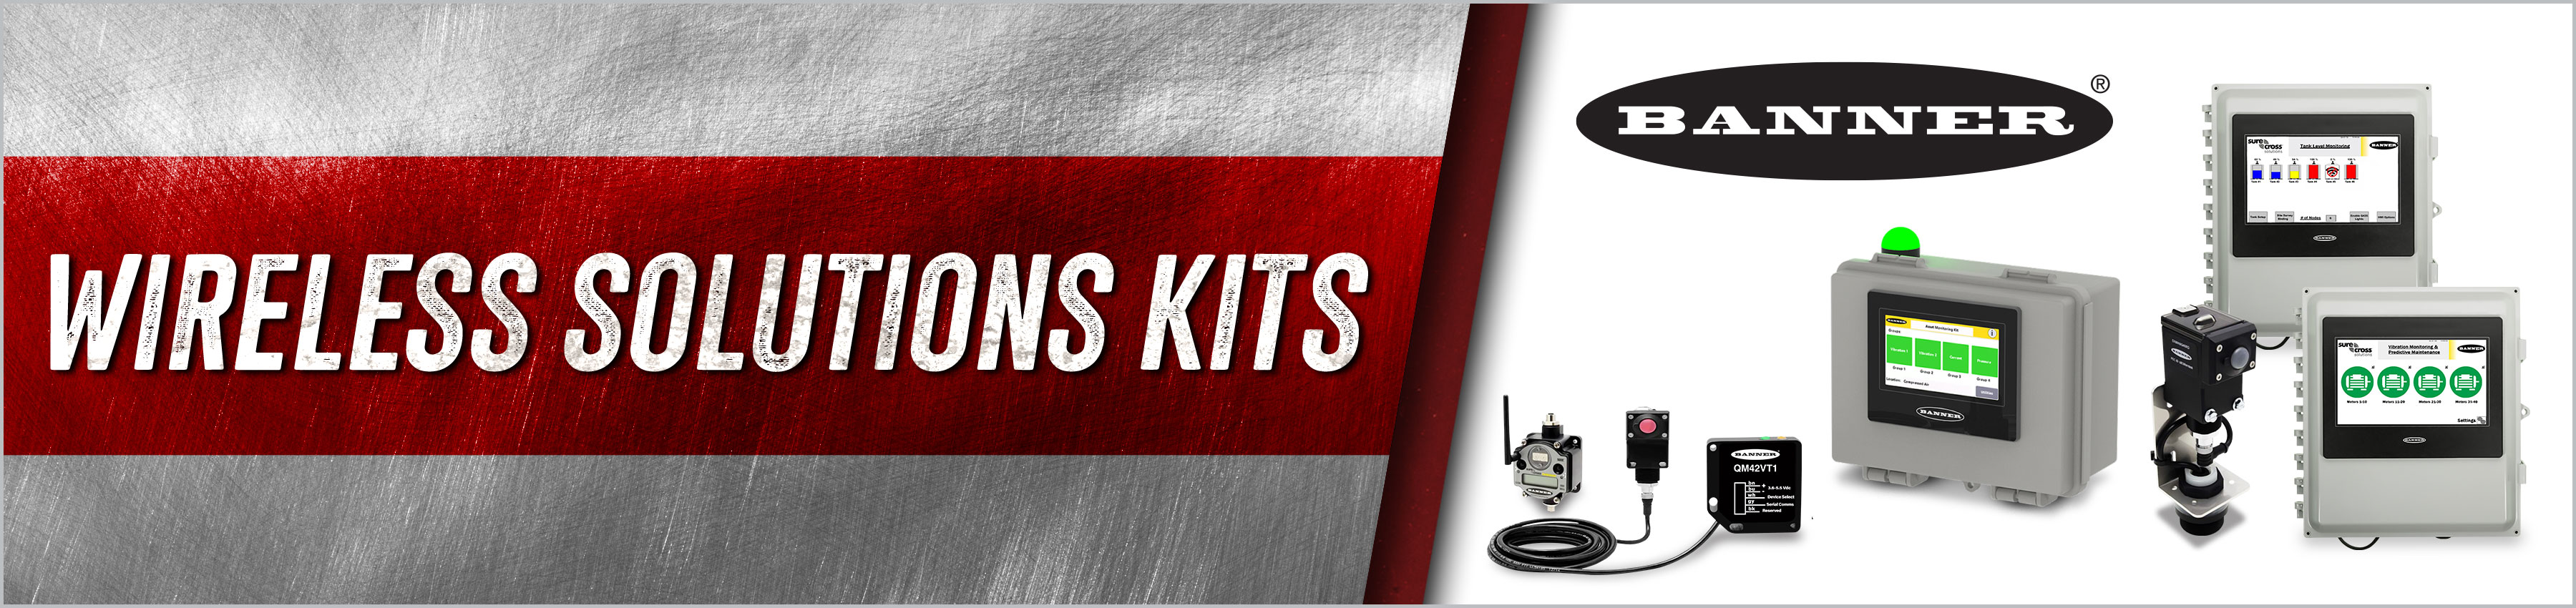 Banner's Wireless Solutions Kits